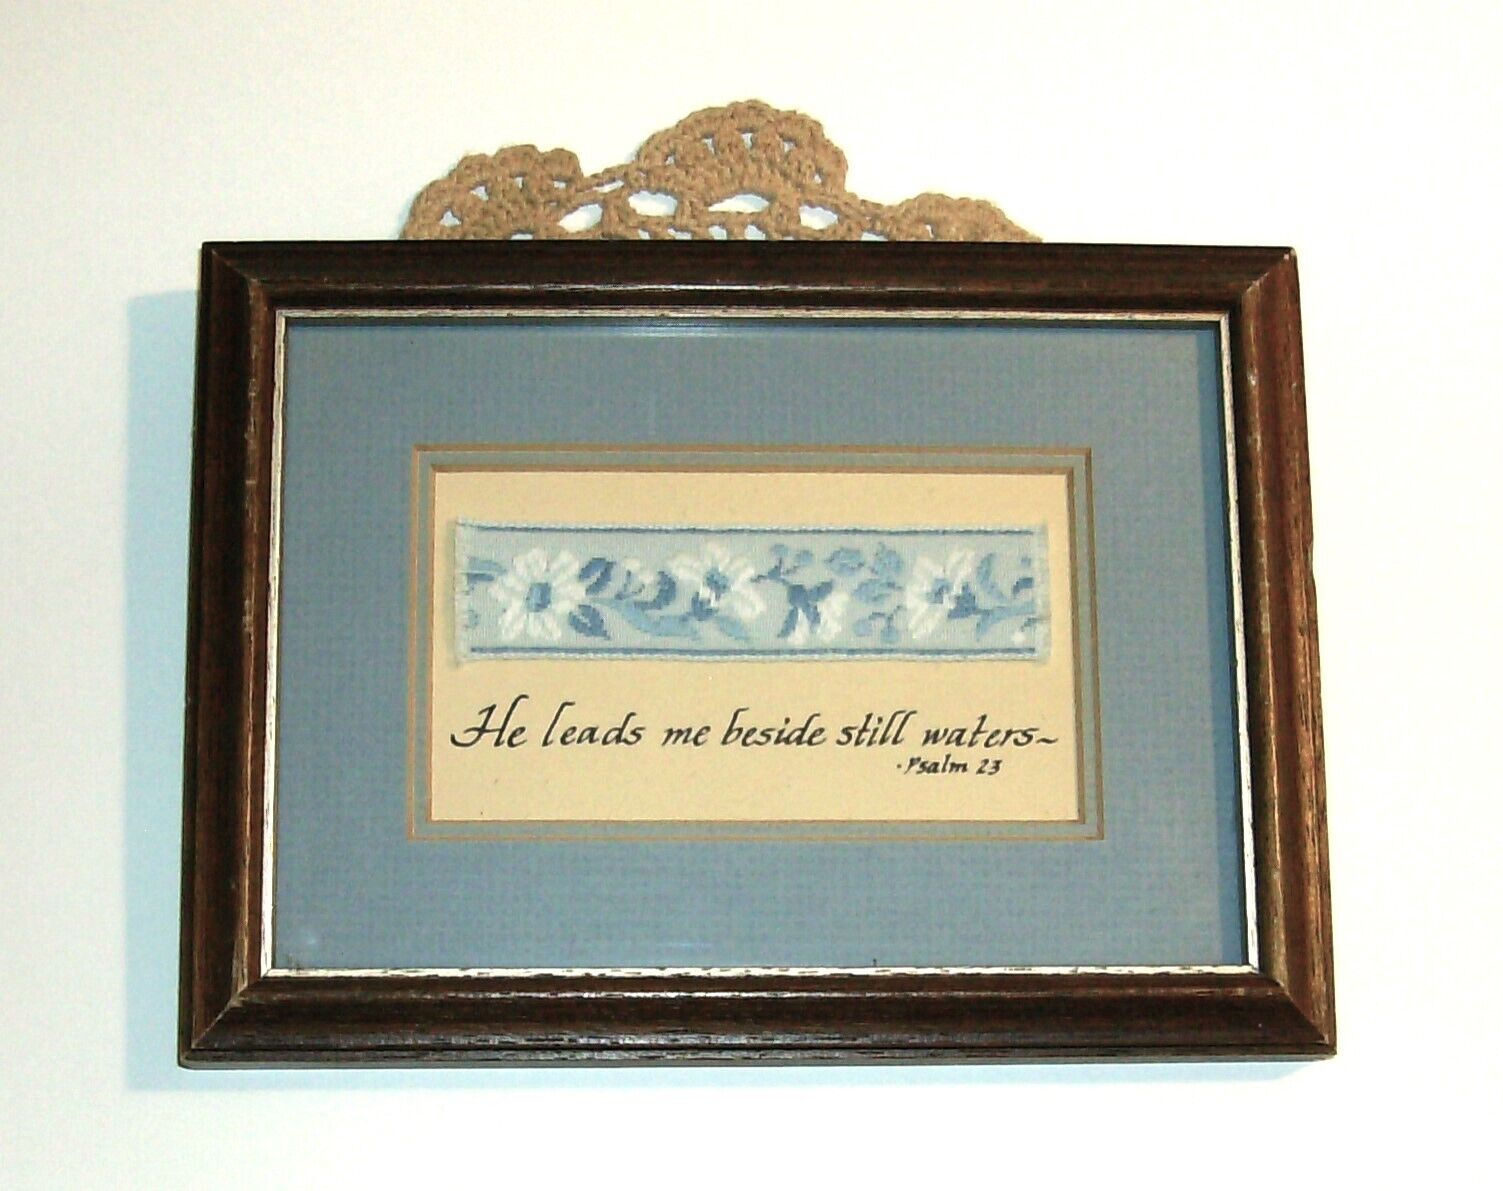 Needle Art Of The Old World #179-Isidore Industries-framed design w/Bible verse